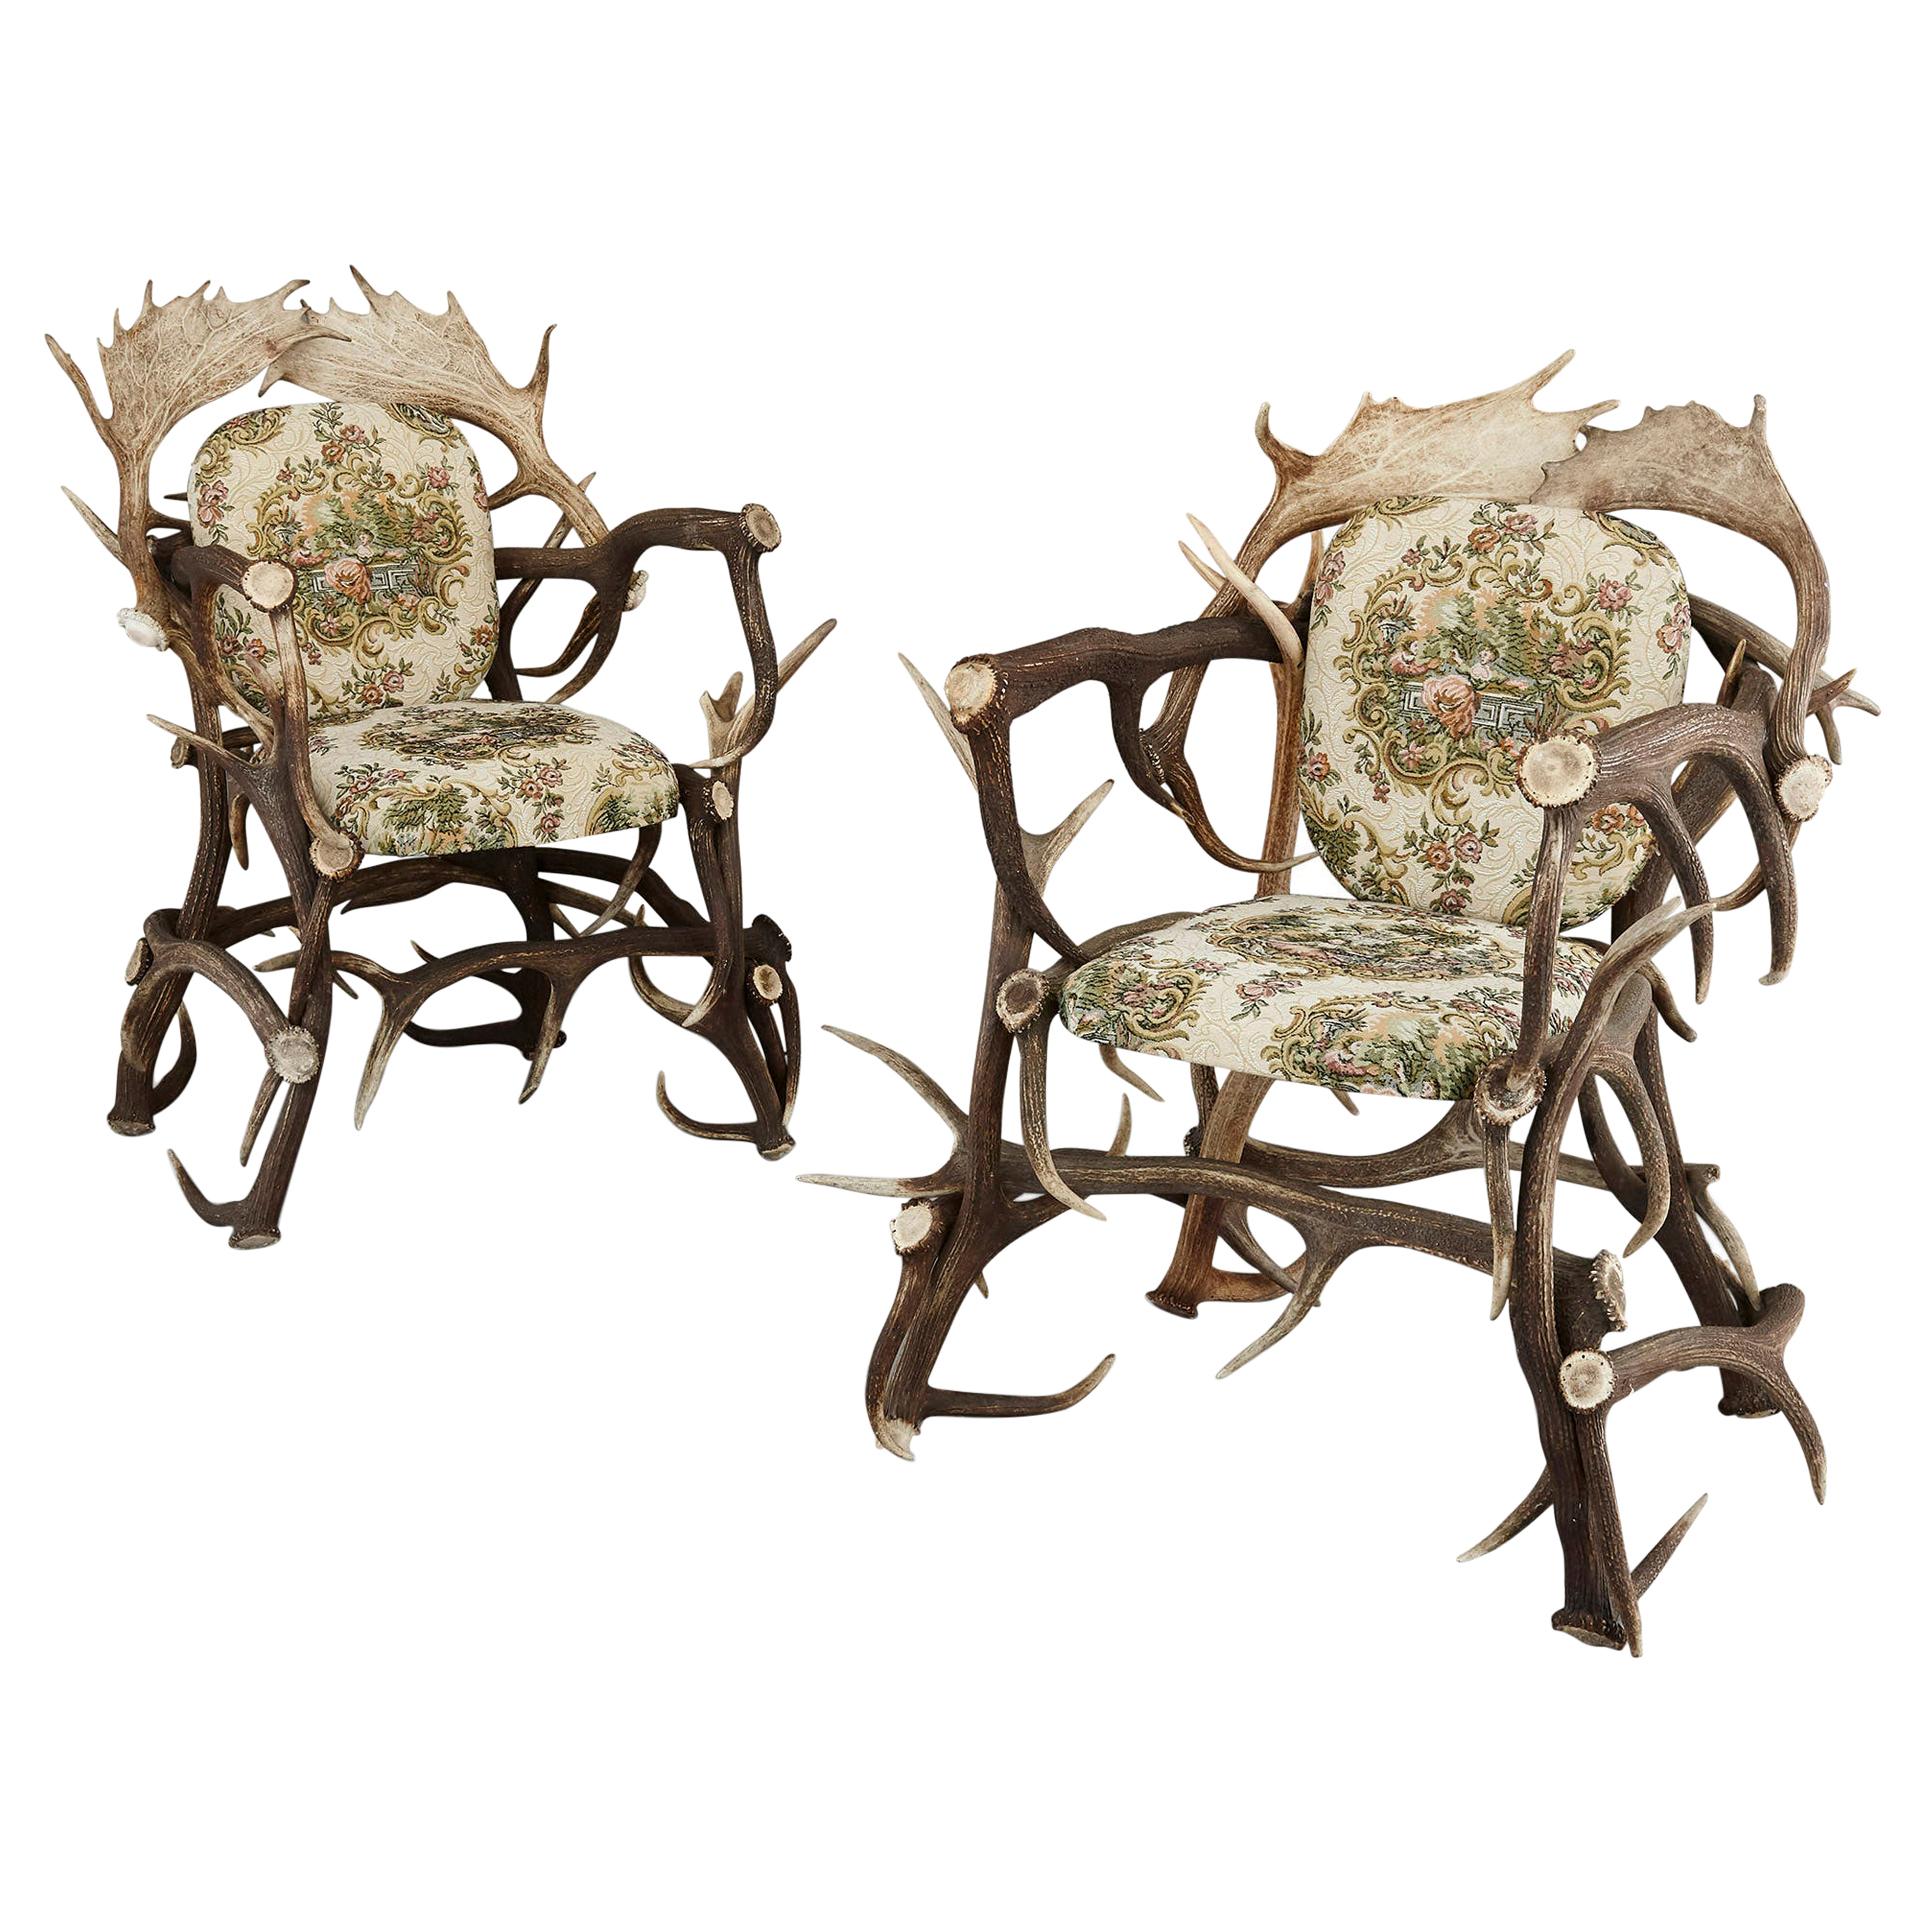 Pair of Antique German Antler Chairs with Rococo Style Upholstery